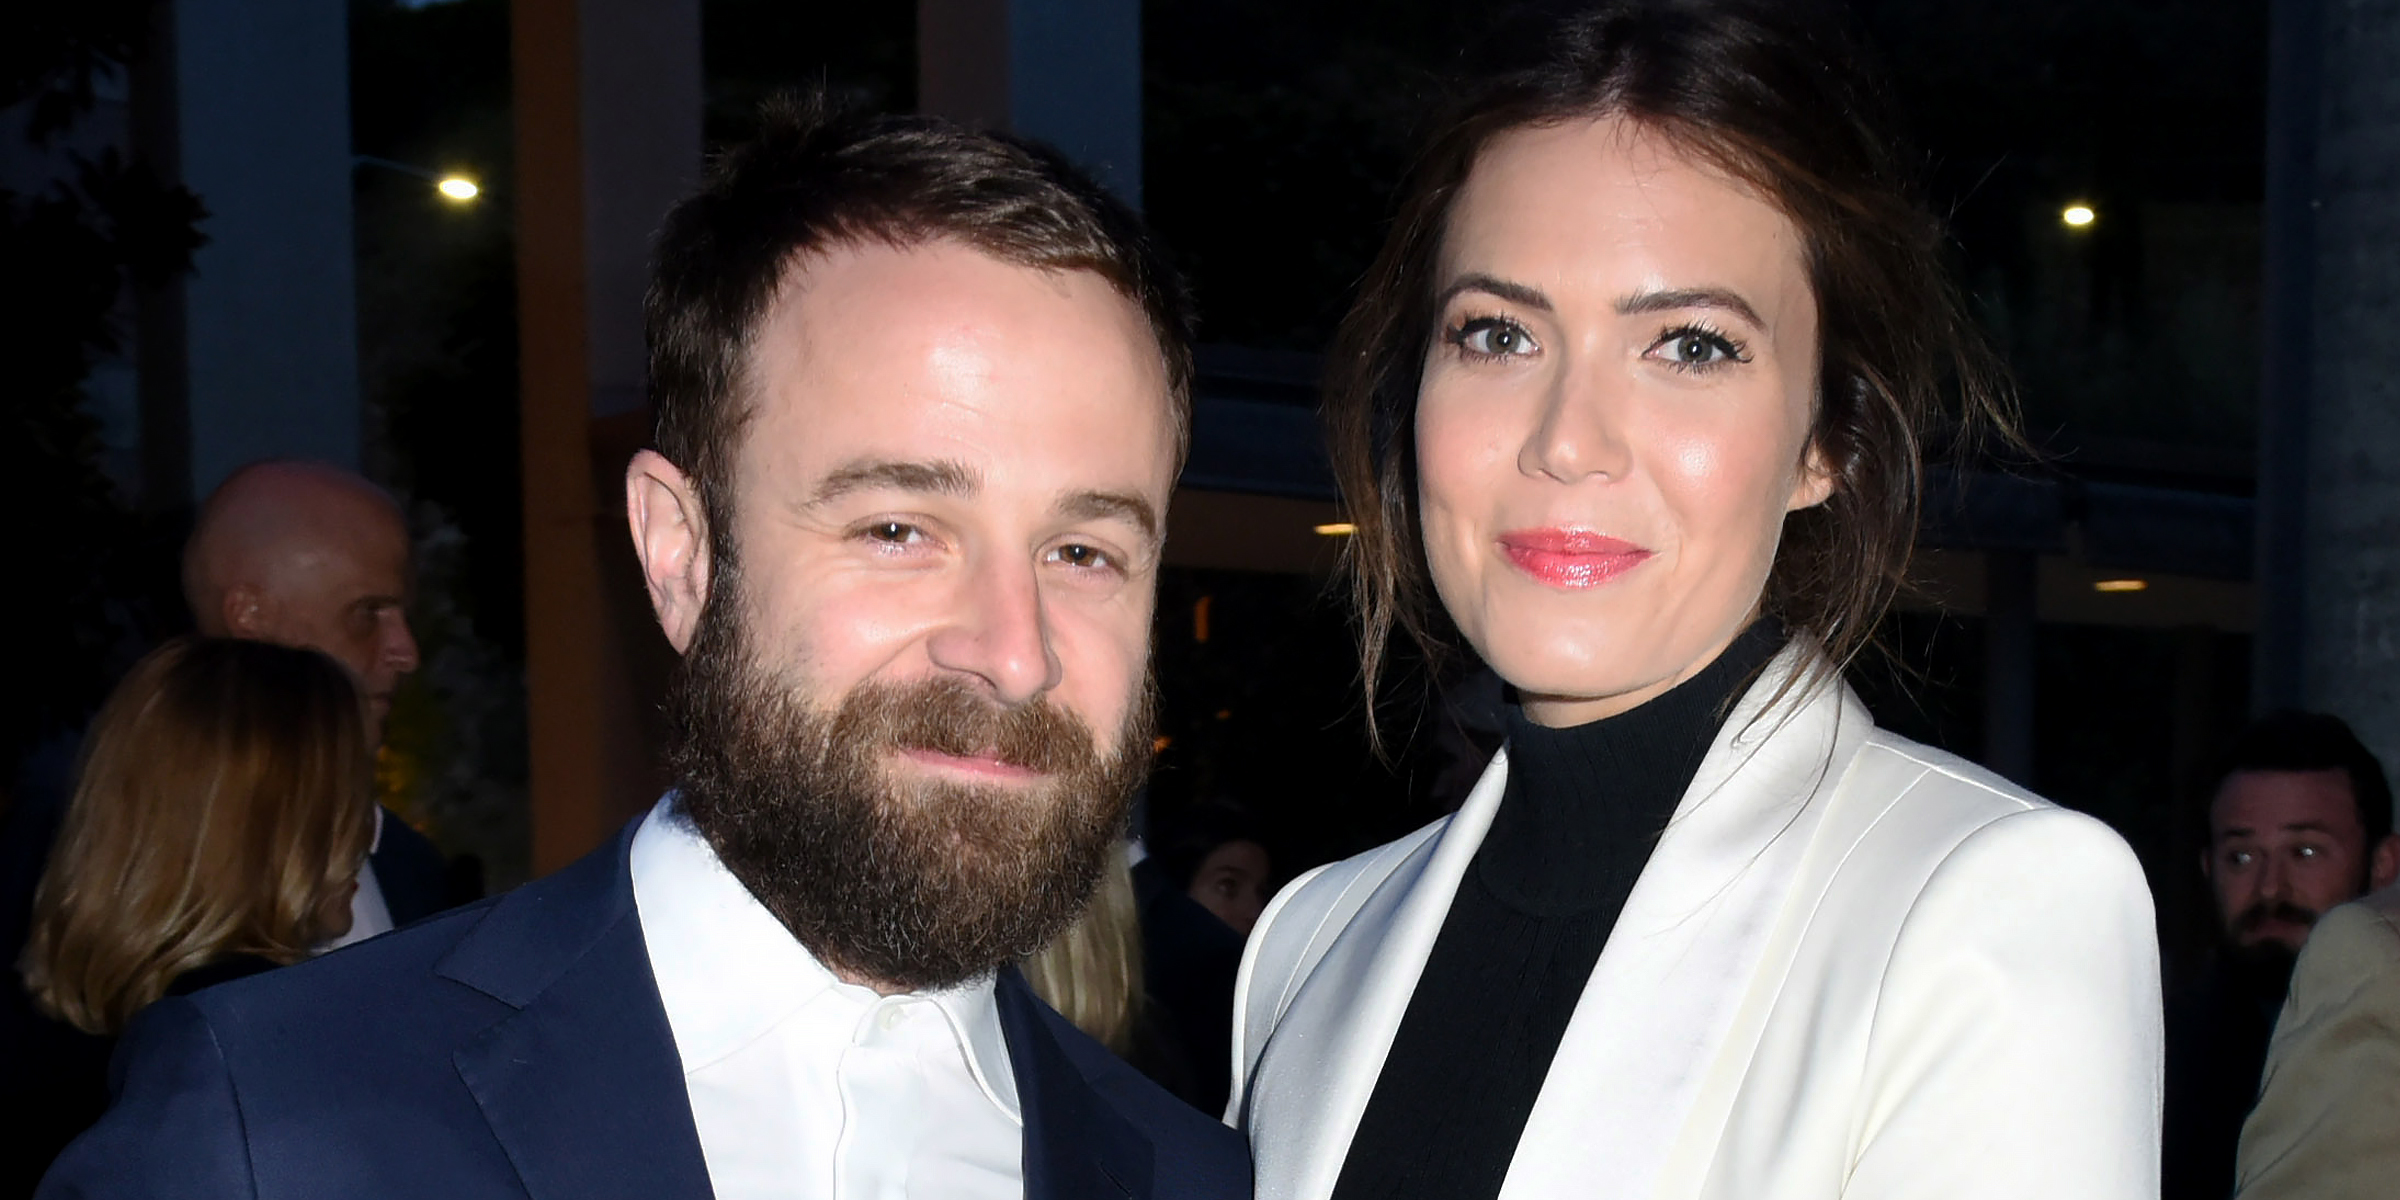 Mandy Moore and Her Husband Taylor Goldsmith | Source: Getty Images